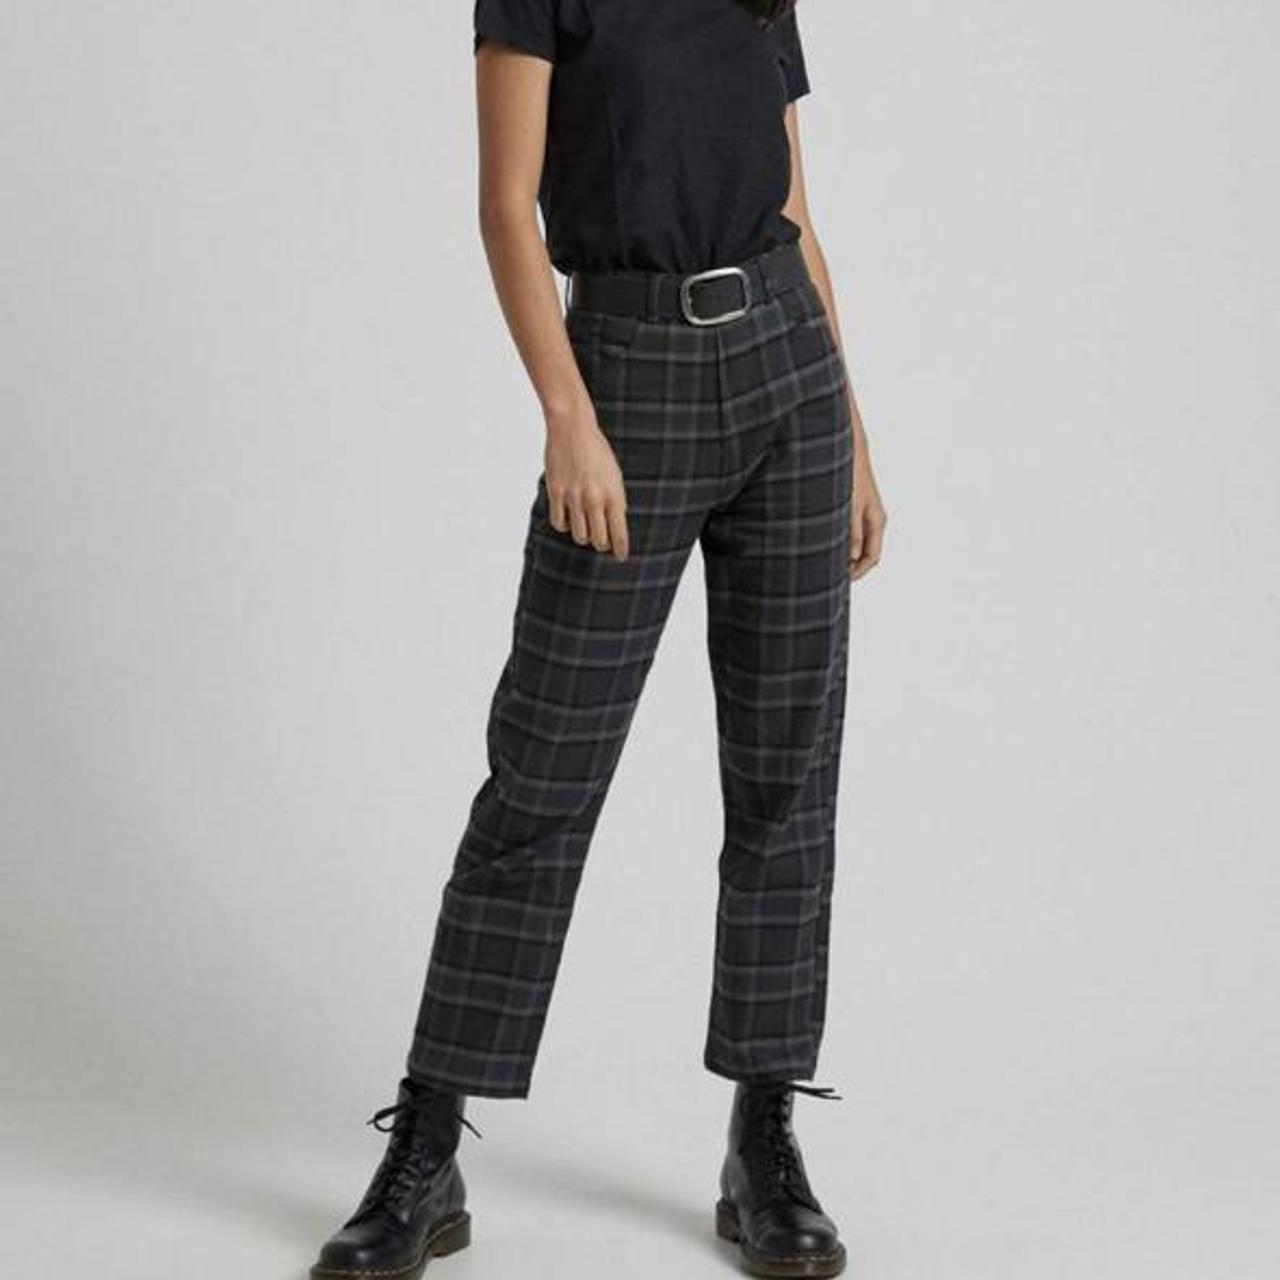 Afends Women's Grey Trousers